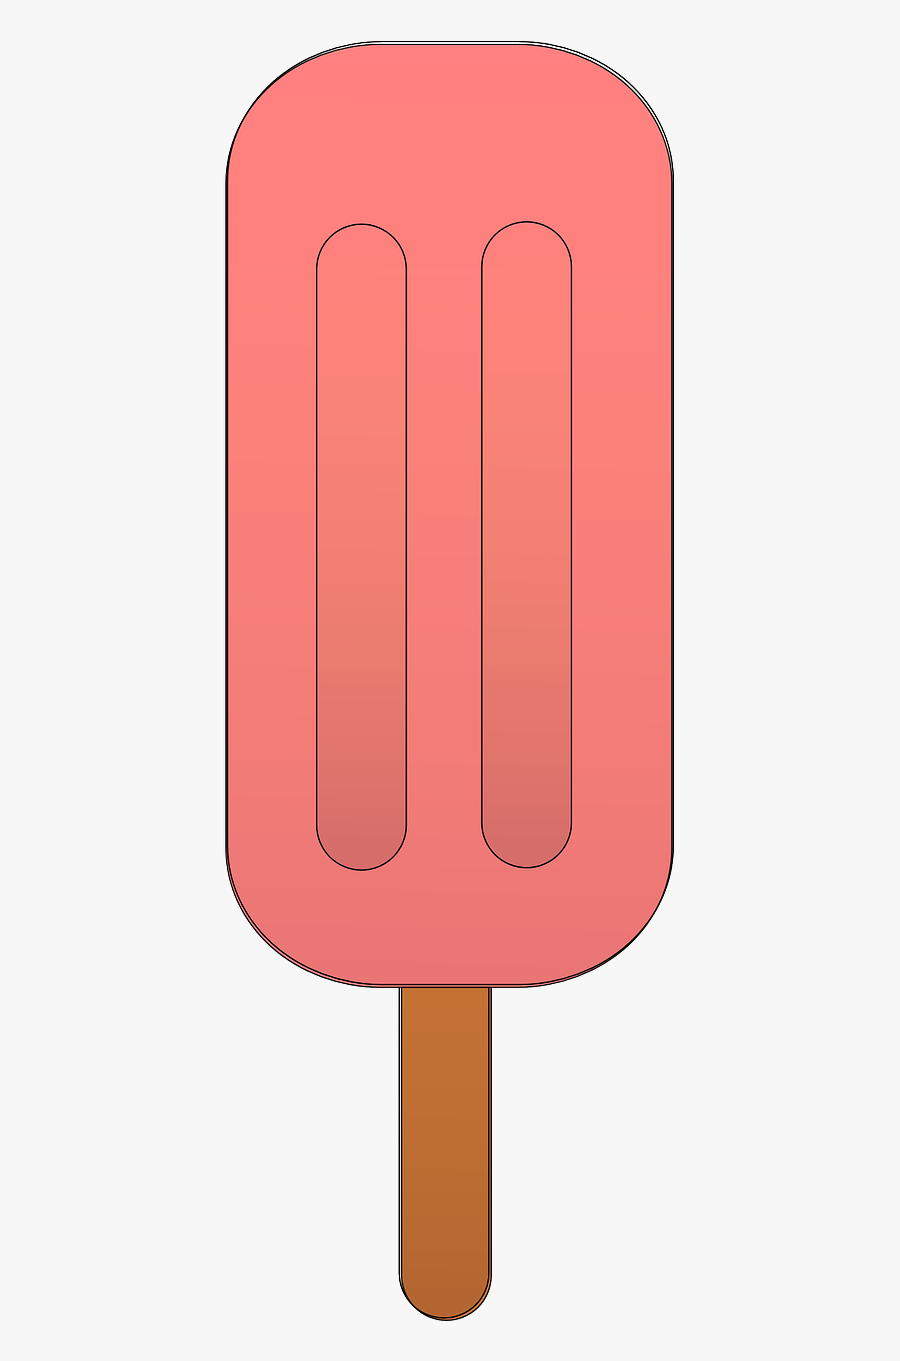 Strawberry Popsicle - Strawberry Popsicle Clipart, Transparent Clipart